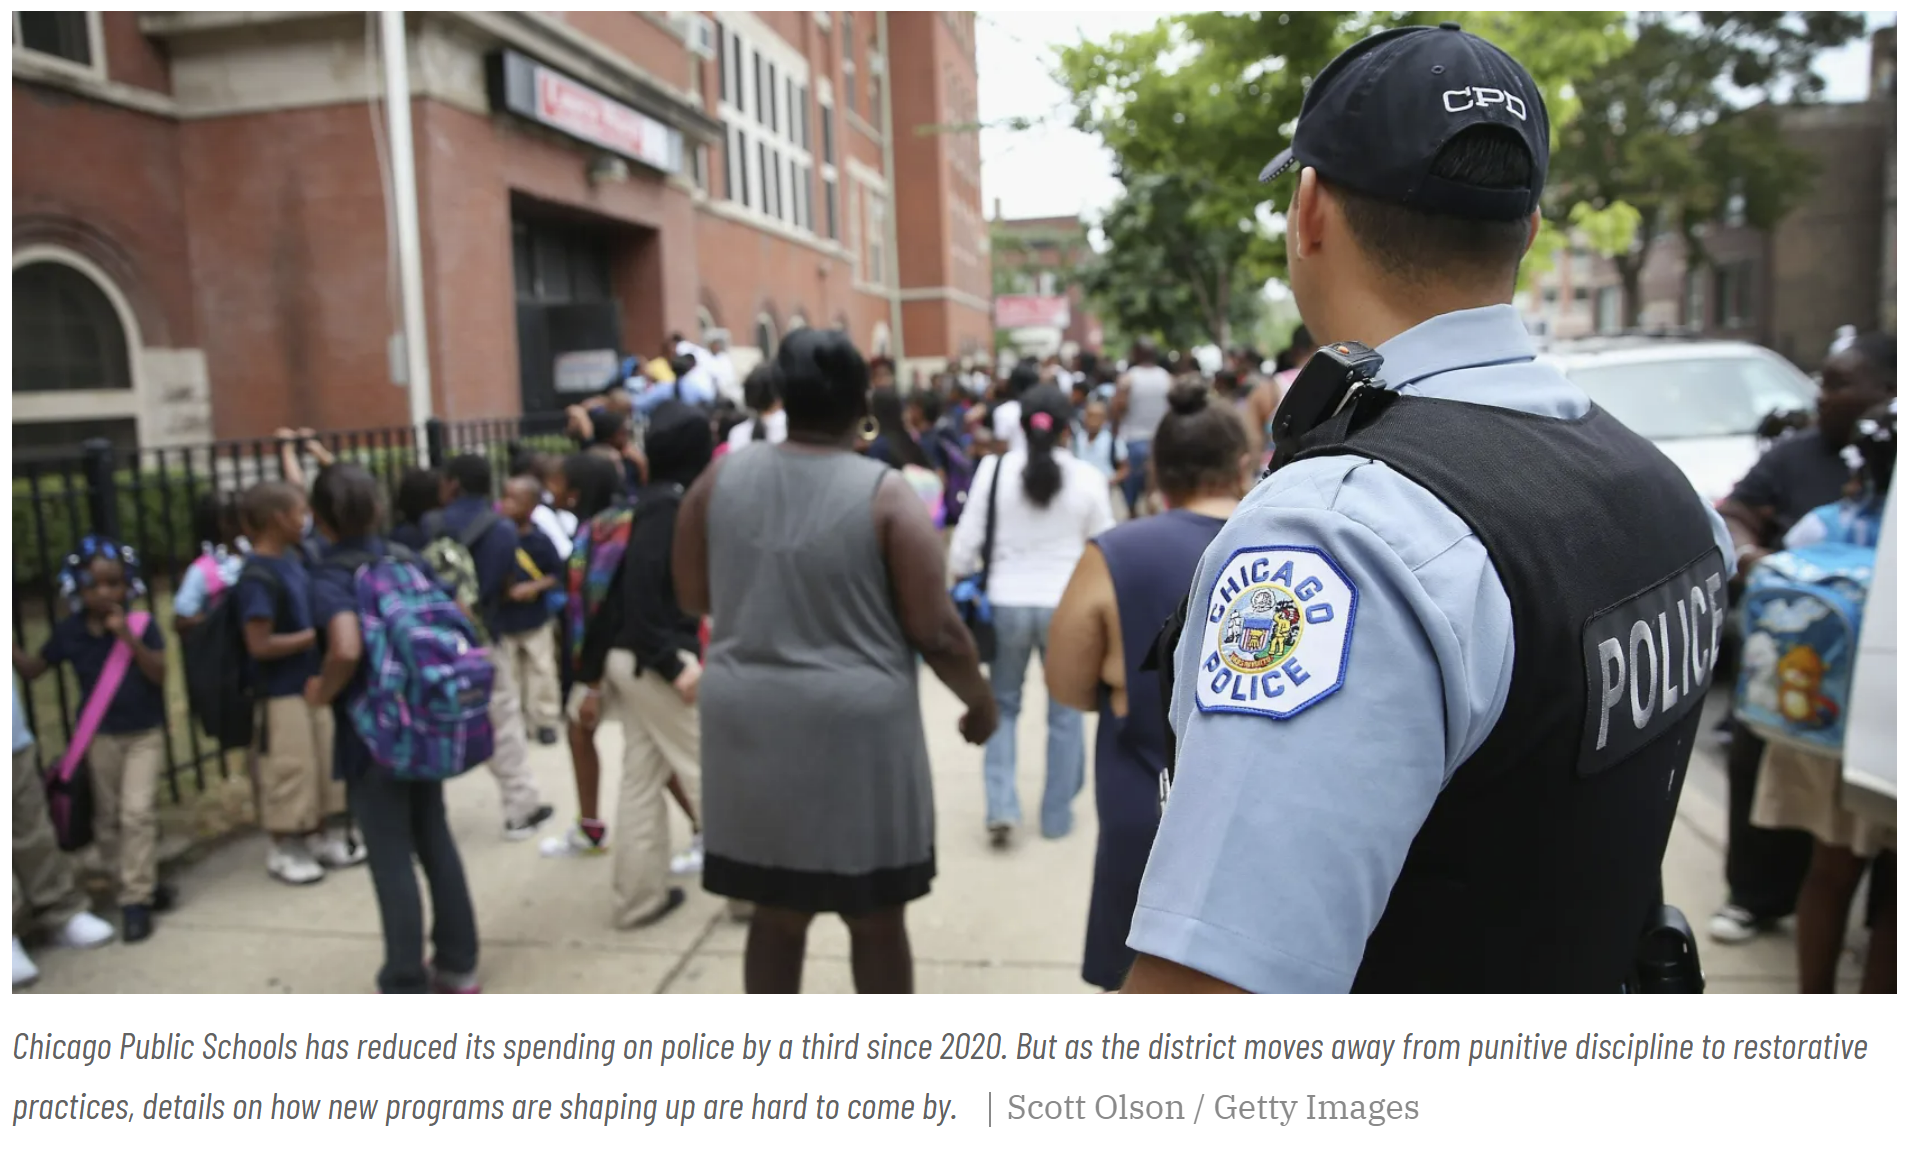 A screenshot image of a cop outside an elementary school with lots of children outside; Image credit: Scott Olson